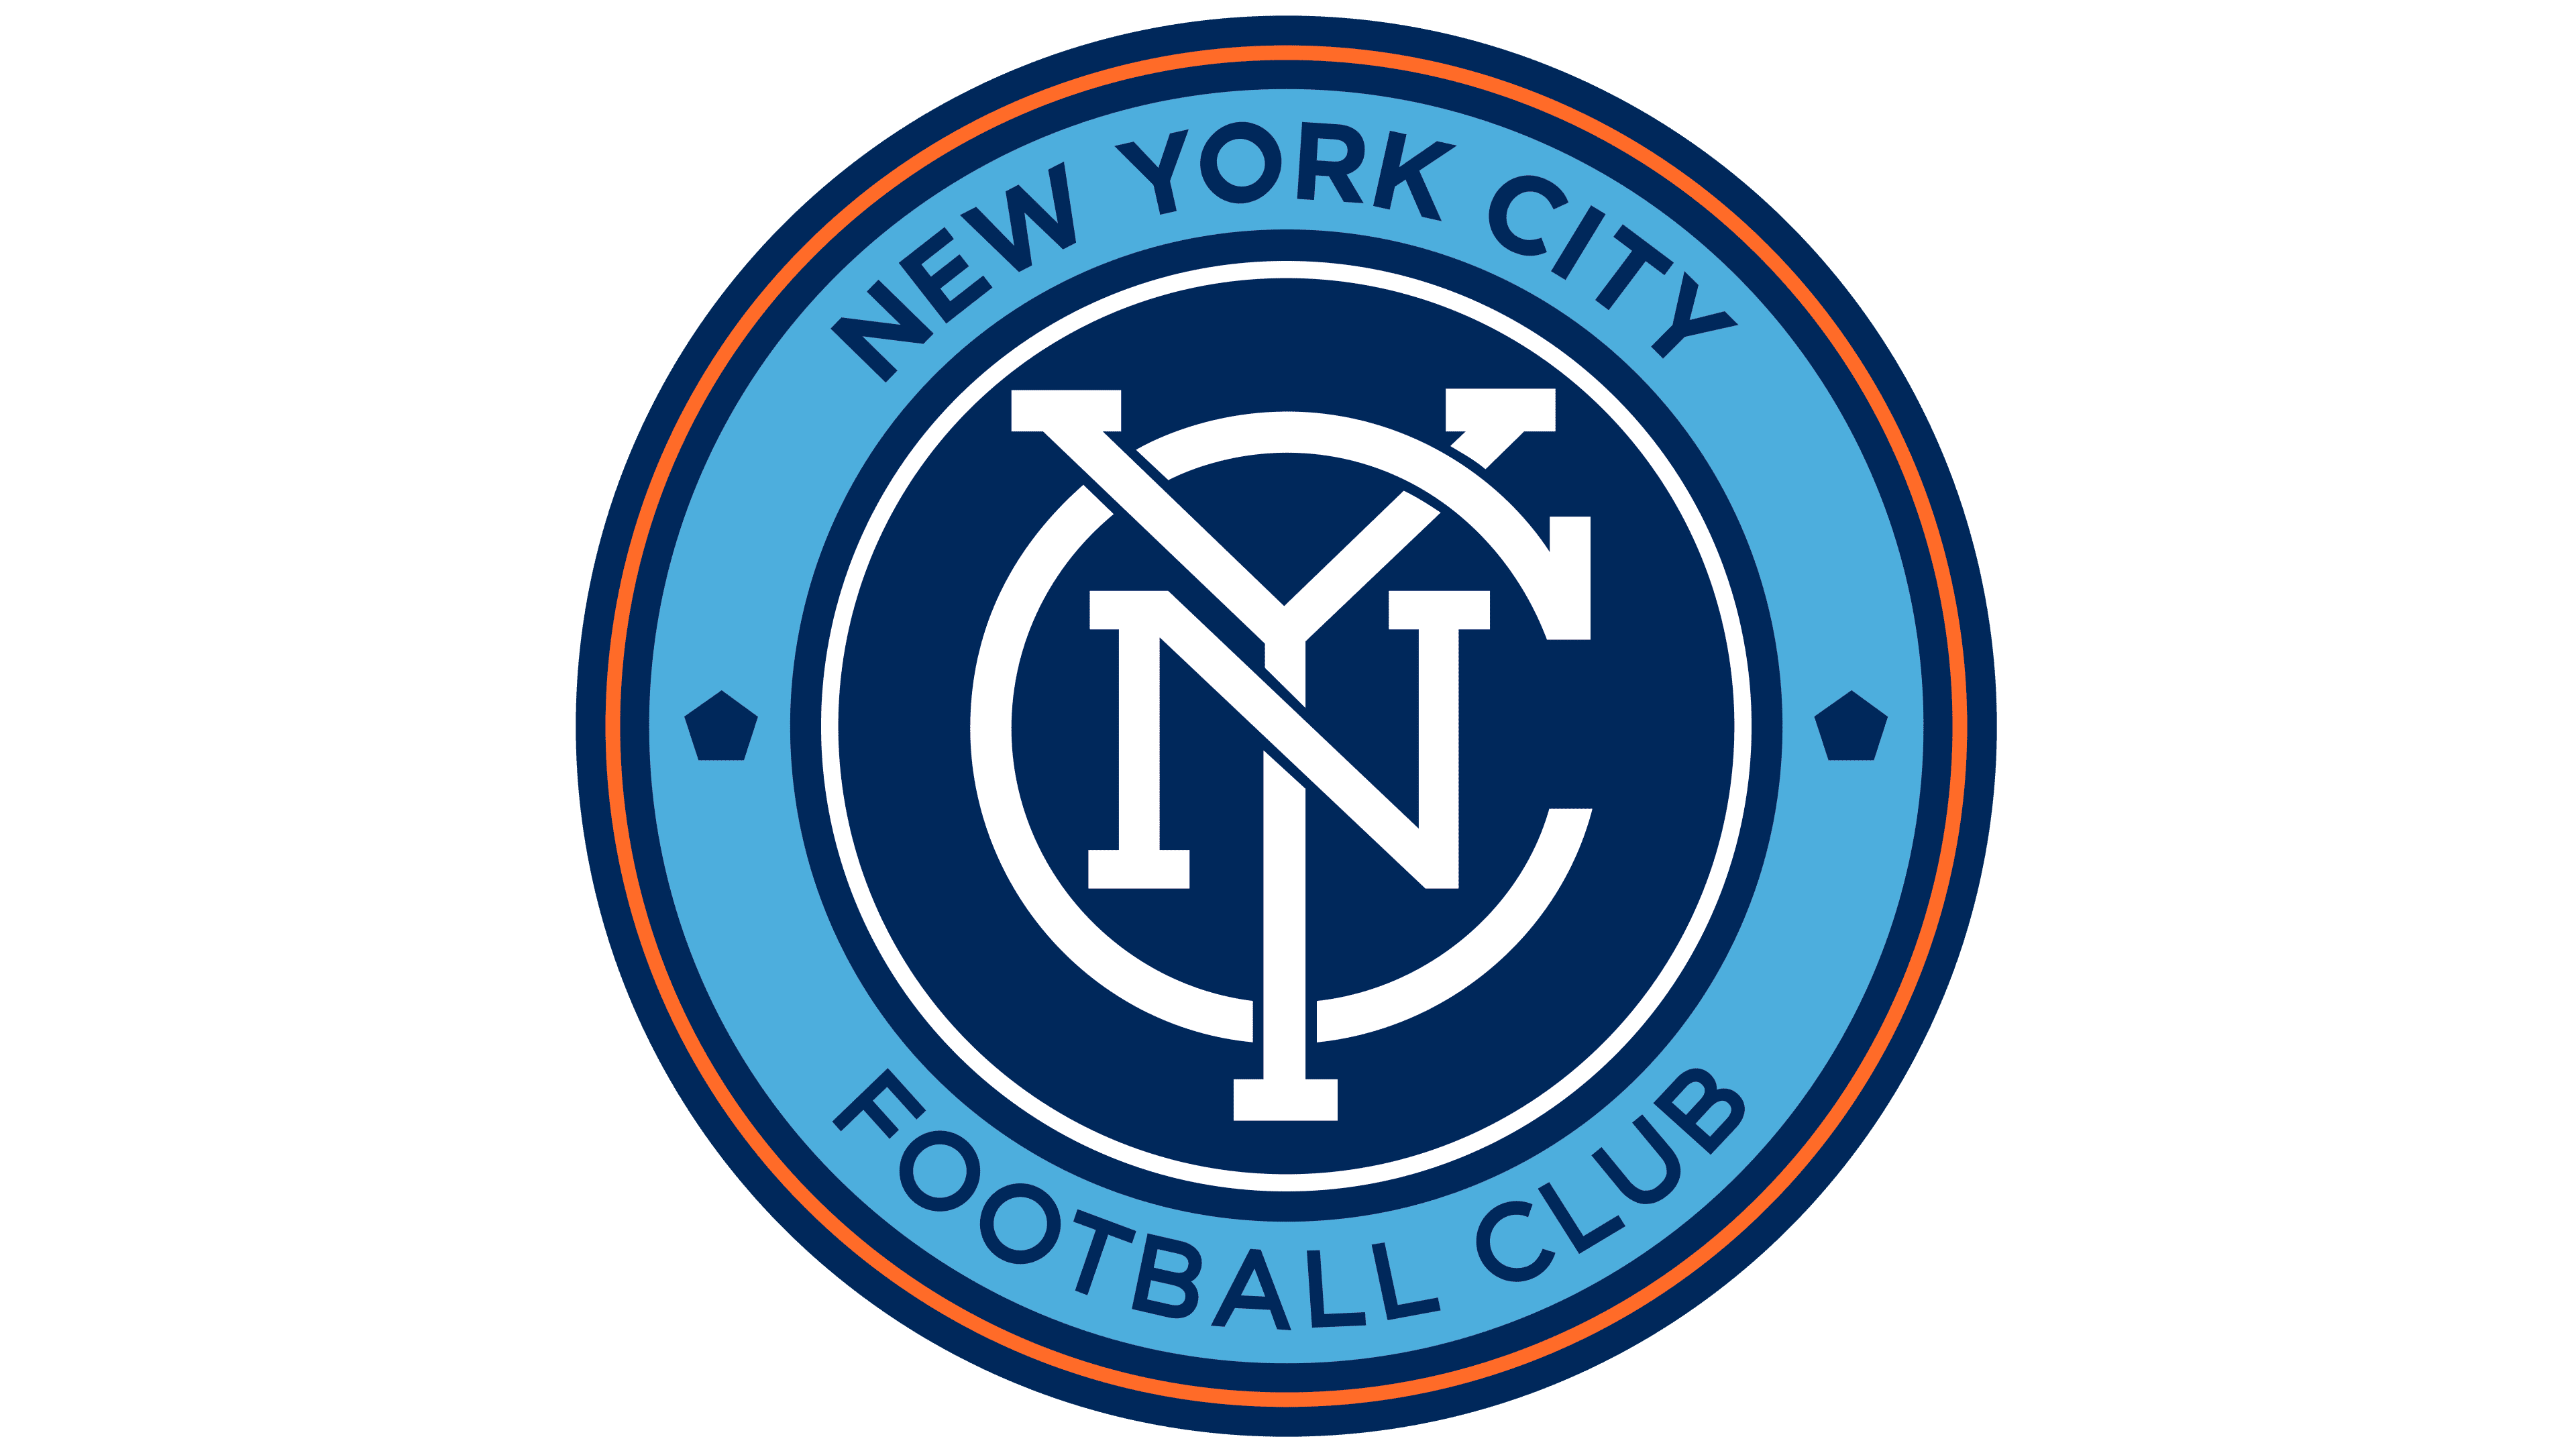 New York City Fc Logo The Most Famous Brands And Company Logos In The World